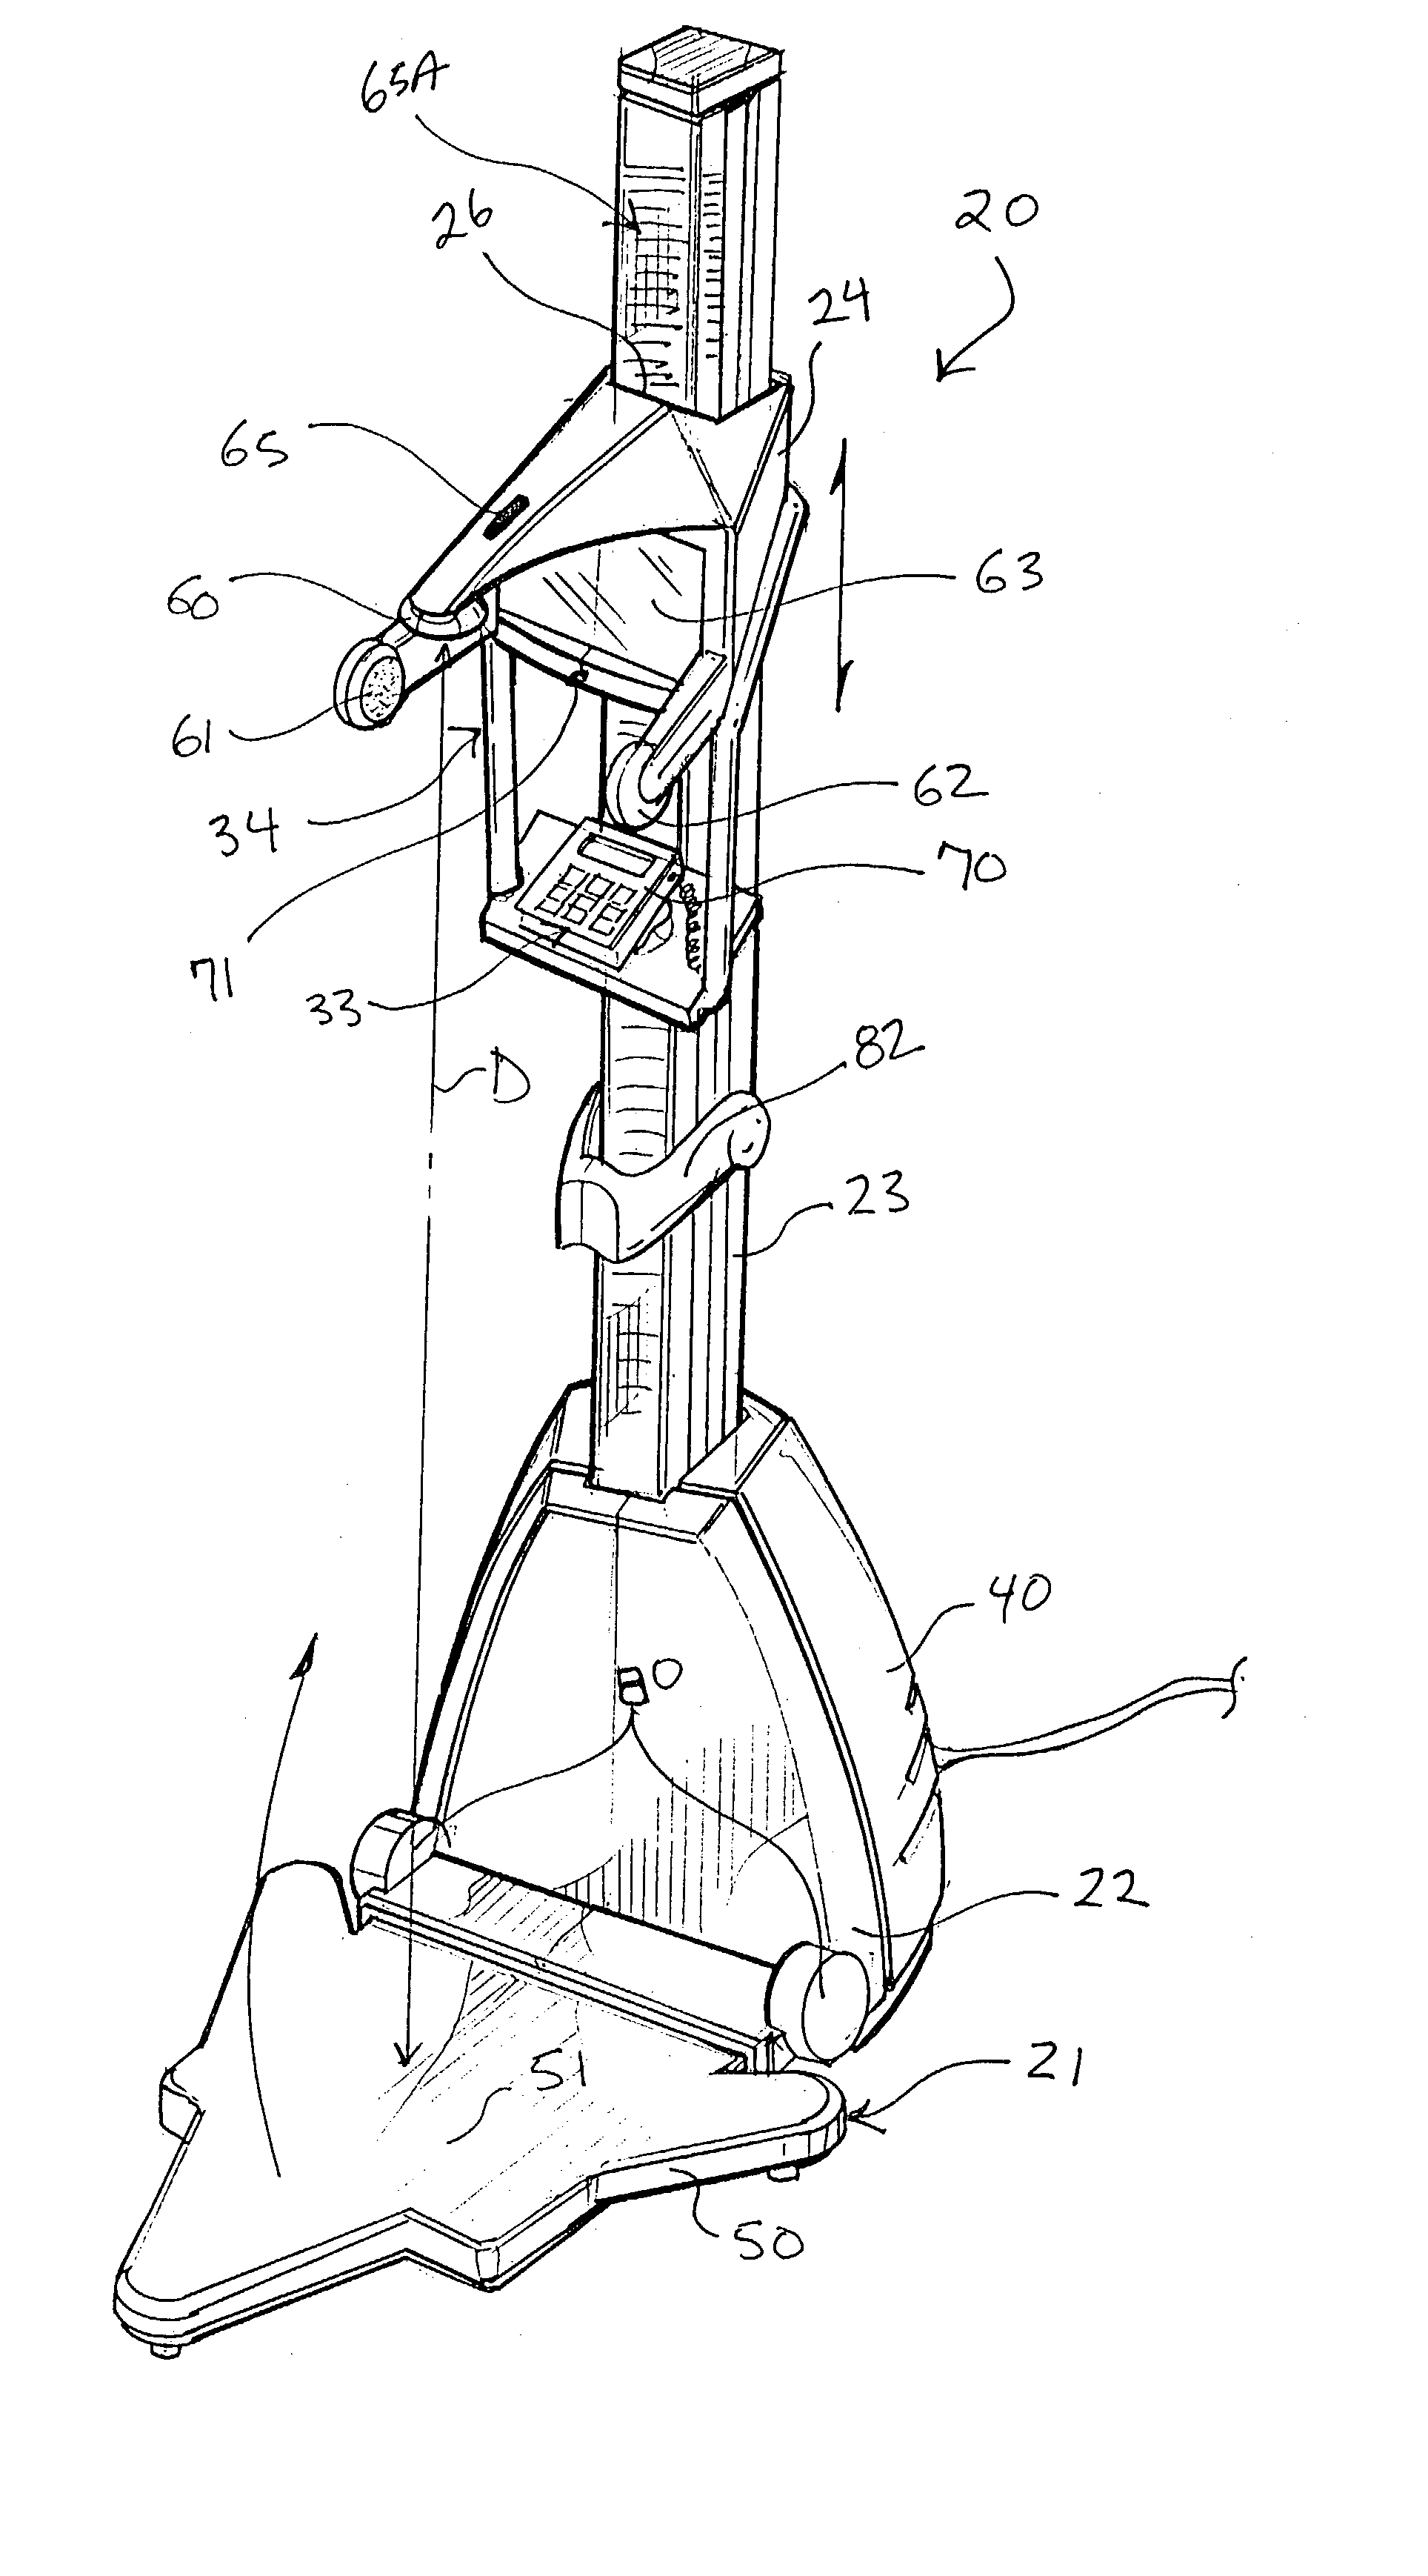 Patient data collection system and methods